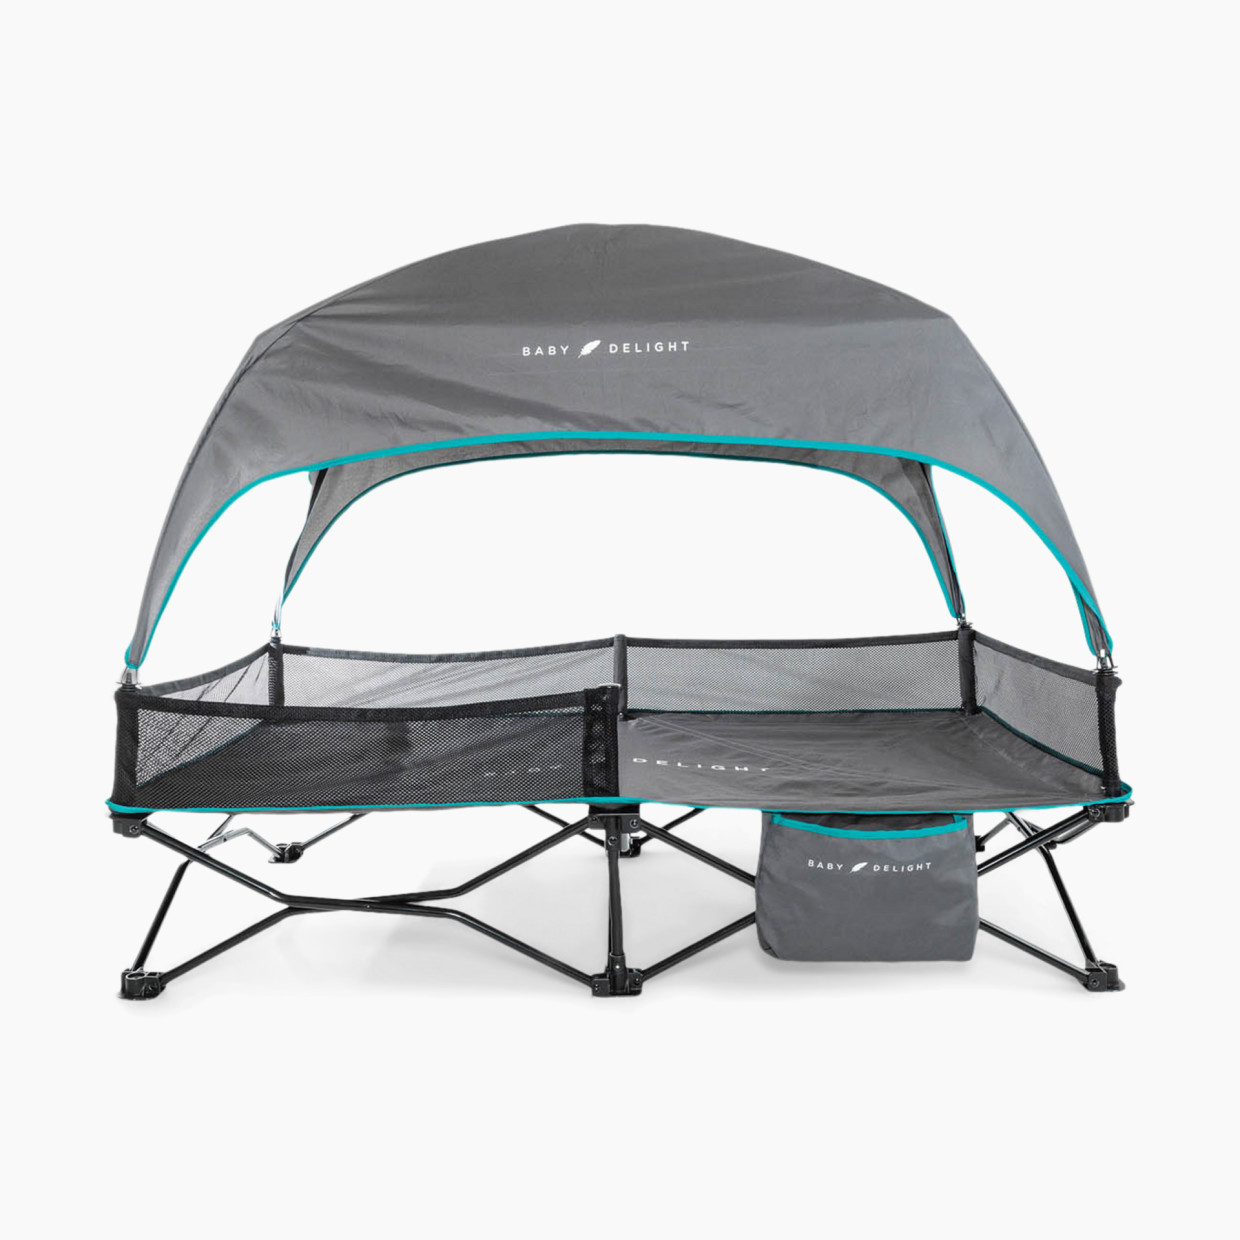 Baby Delight Go With Me Bungalow Deluxe Portable Travel Cot - Grey/Teal.